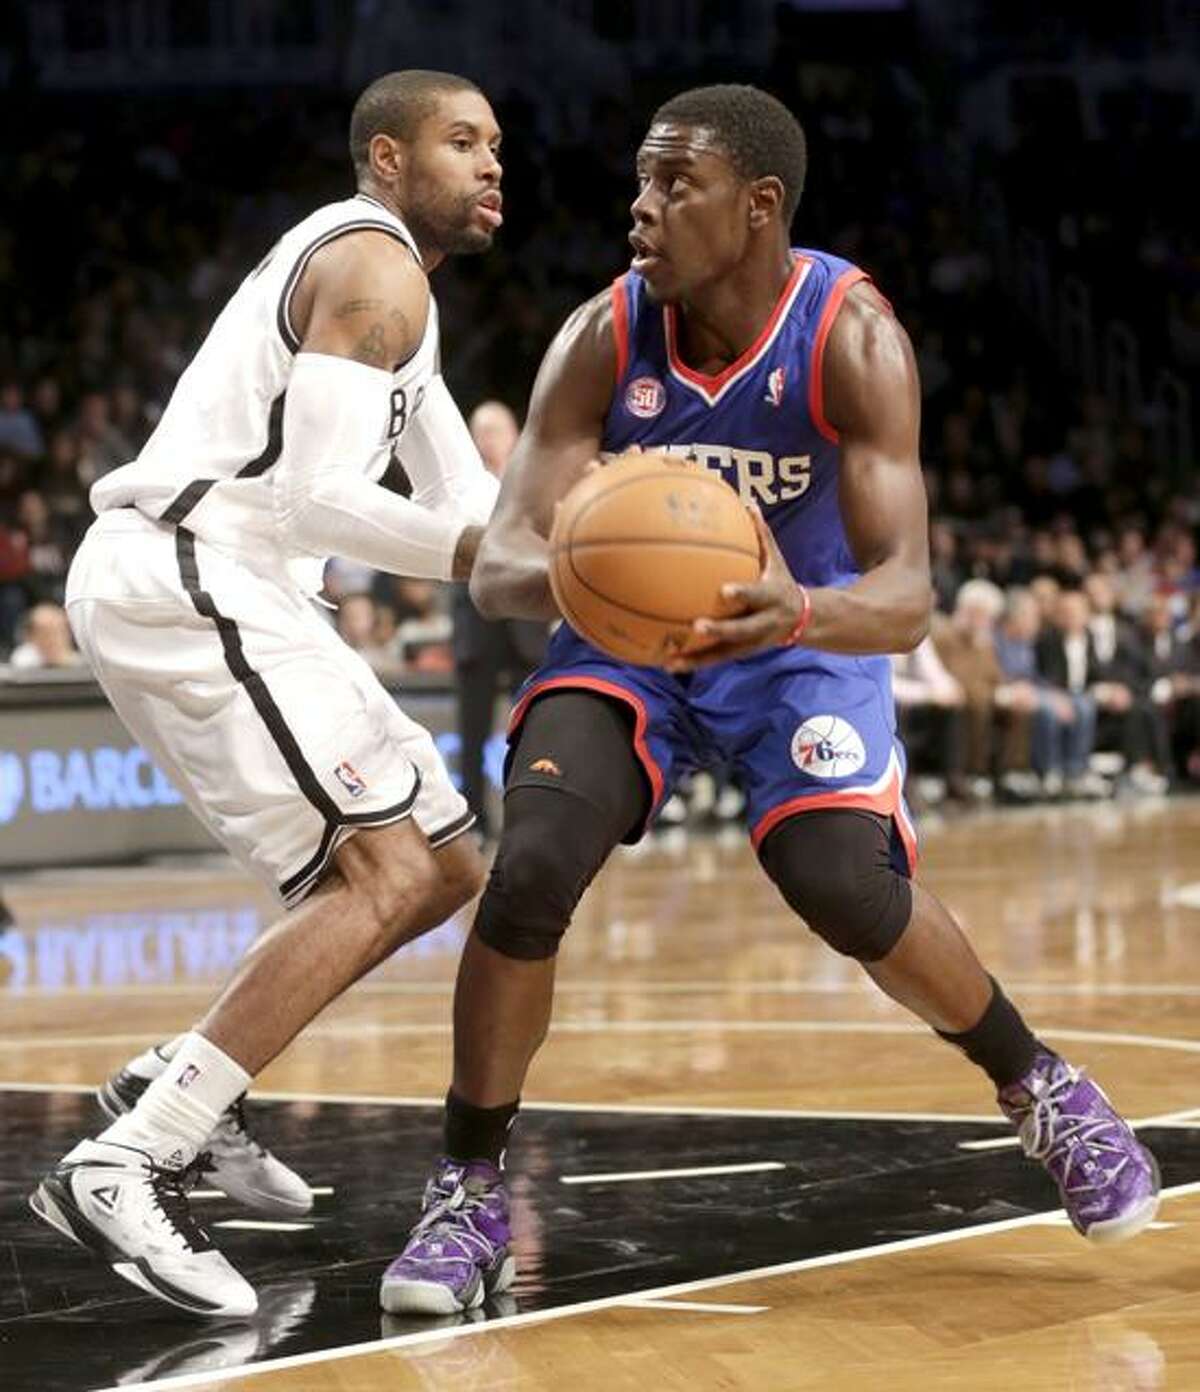 Philadelphia 76ers' Jrue Holiday, right, looks to the basket while Brooklyn Nets' C.J. Watson defends during the second half of an NBA basketball game at the Barclays Center Sunday, Dec. 23, 2012 in New York. The Nets beat the 76ers 95-92. (AP Photo/Seth Wenig)